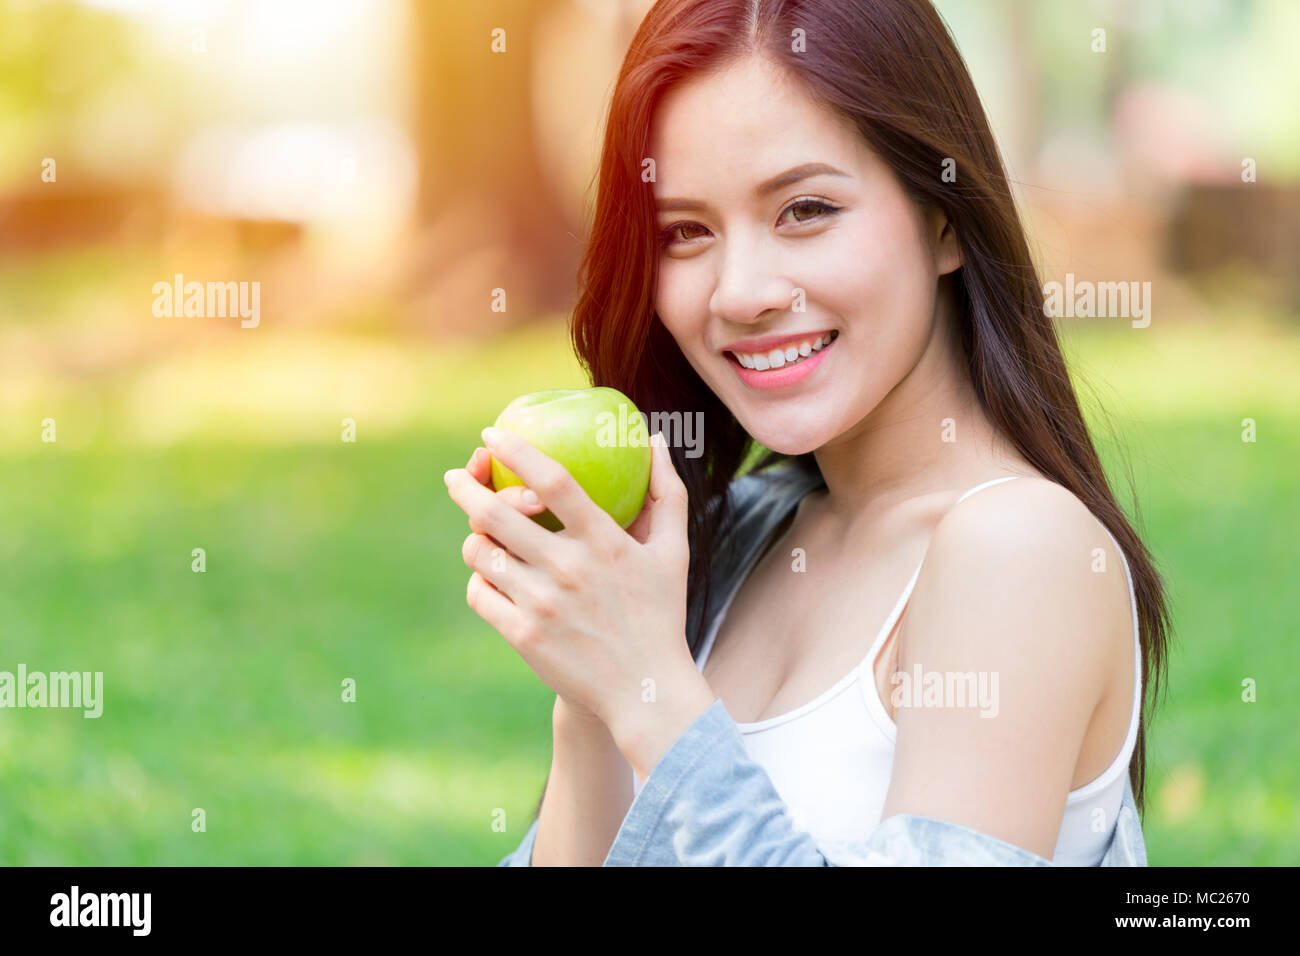 Beautiful Asian women model hand hold Green Apple in park outdoor healthy eating organic food fruits diet concept Stock Photo